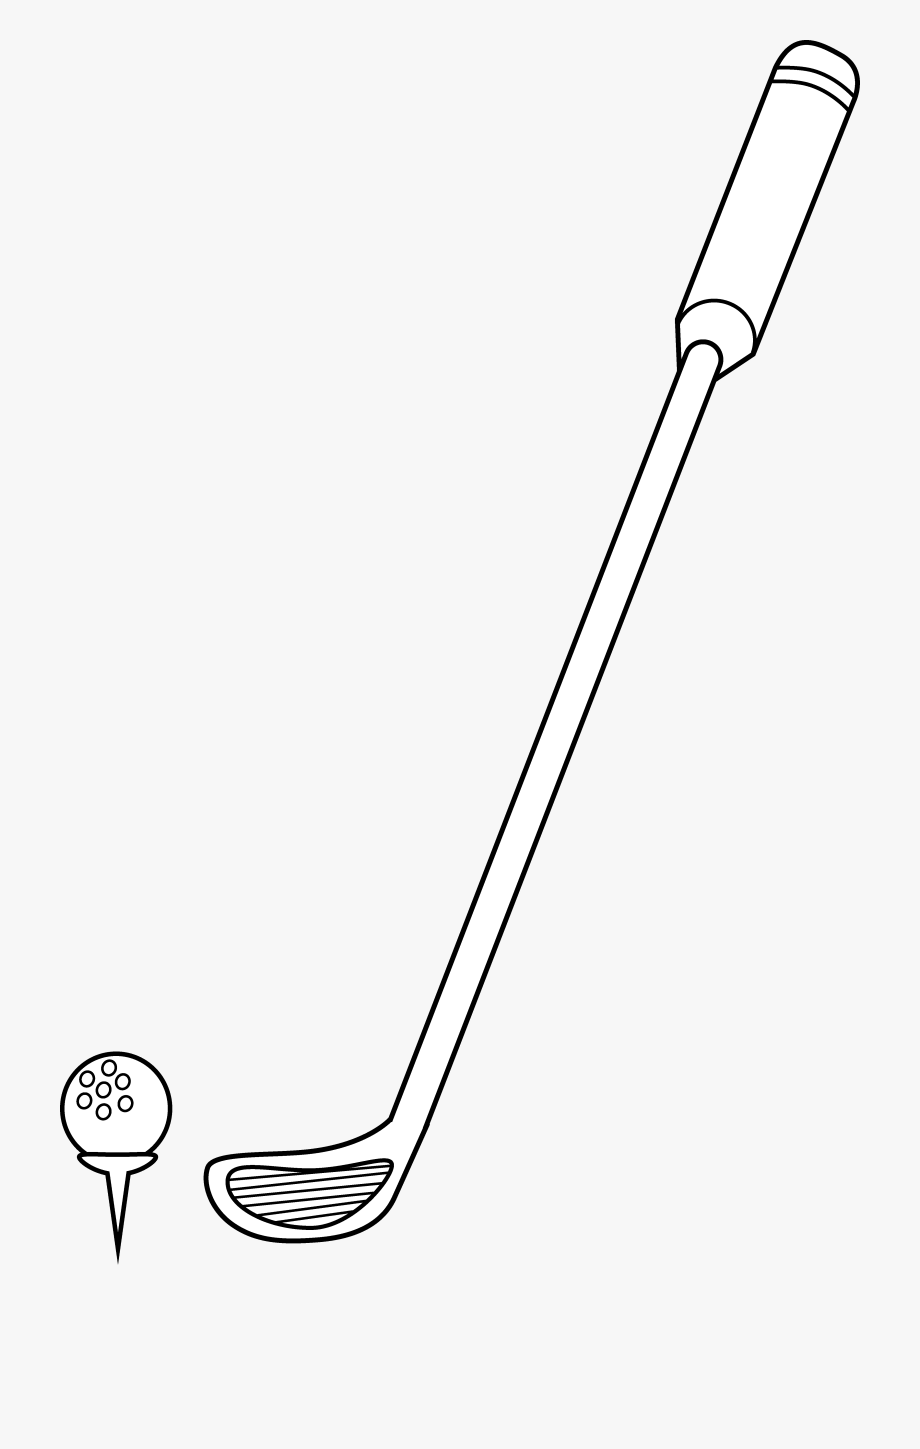 golf club clipart black and white 10 free Cliparts | Download images on ...